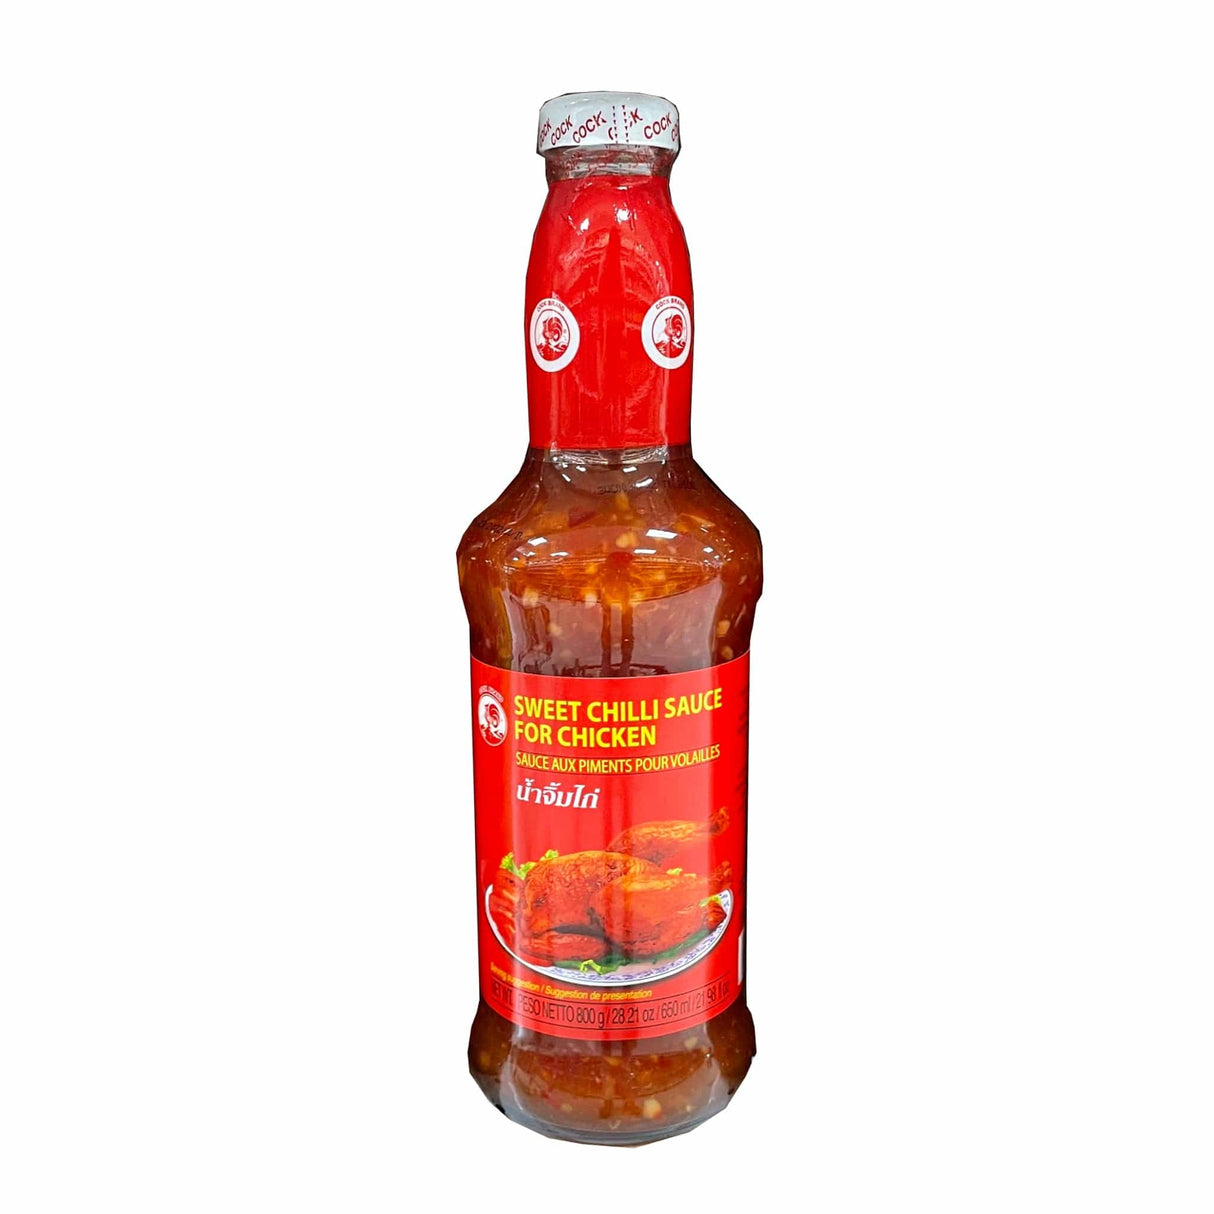 Cock Brand Sweet Chilli Sauce For Chicken